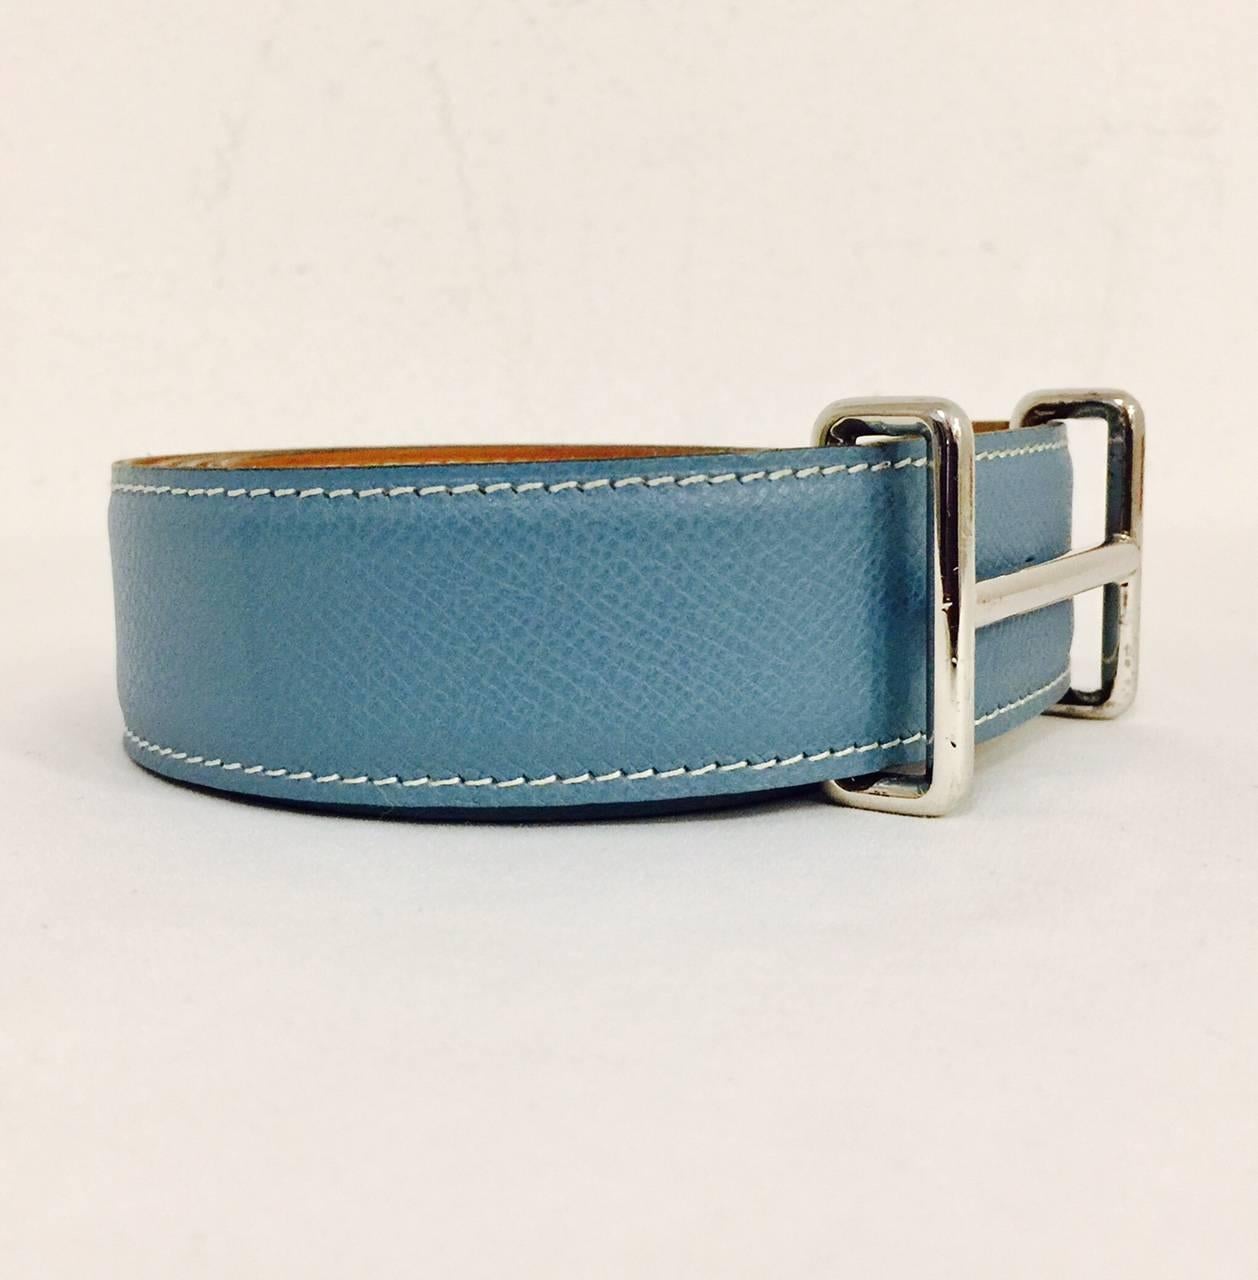 Hermes Reversible  Belt With PHW Idem Buckle is perfect for a man or a woman!  Features signature Blue Jean Epsom and Gold Chamonix leathers with Palladium Idem buckle.  Stamped "I" in a Square.  Made in France.  Fits Waists 36.5" to